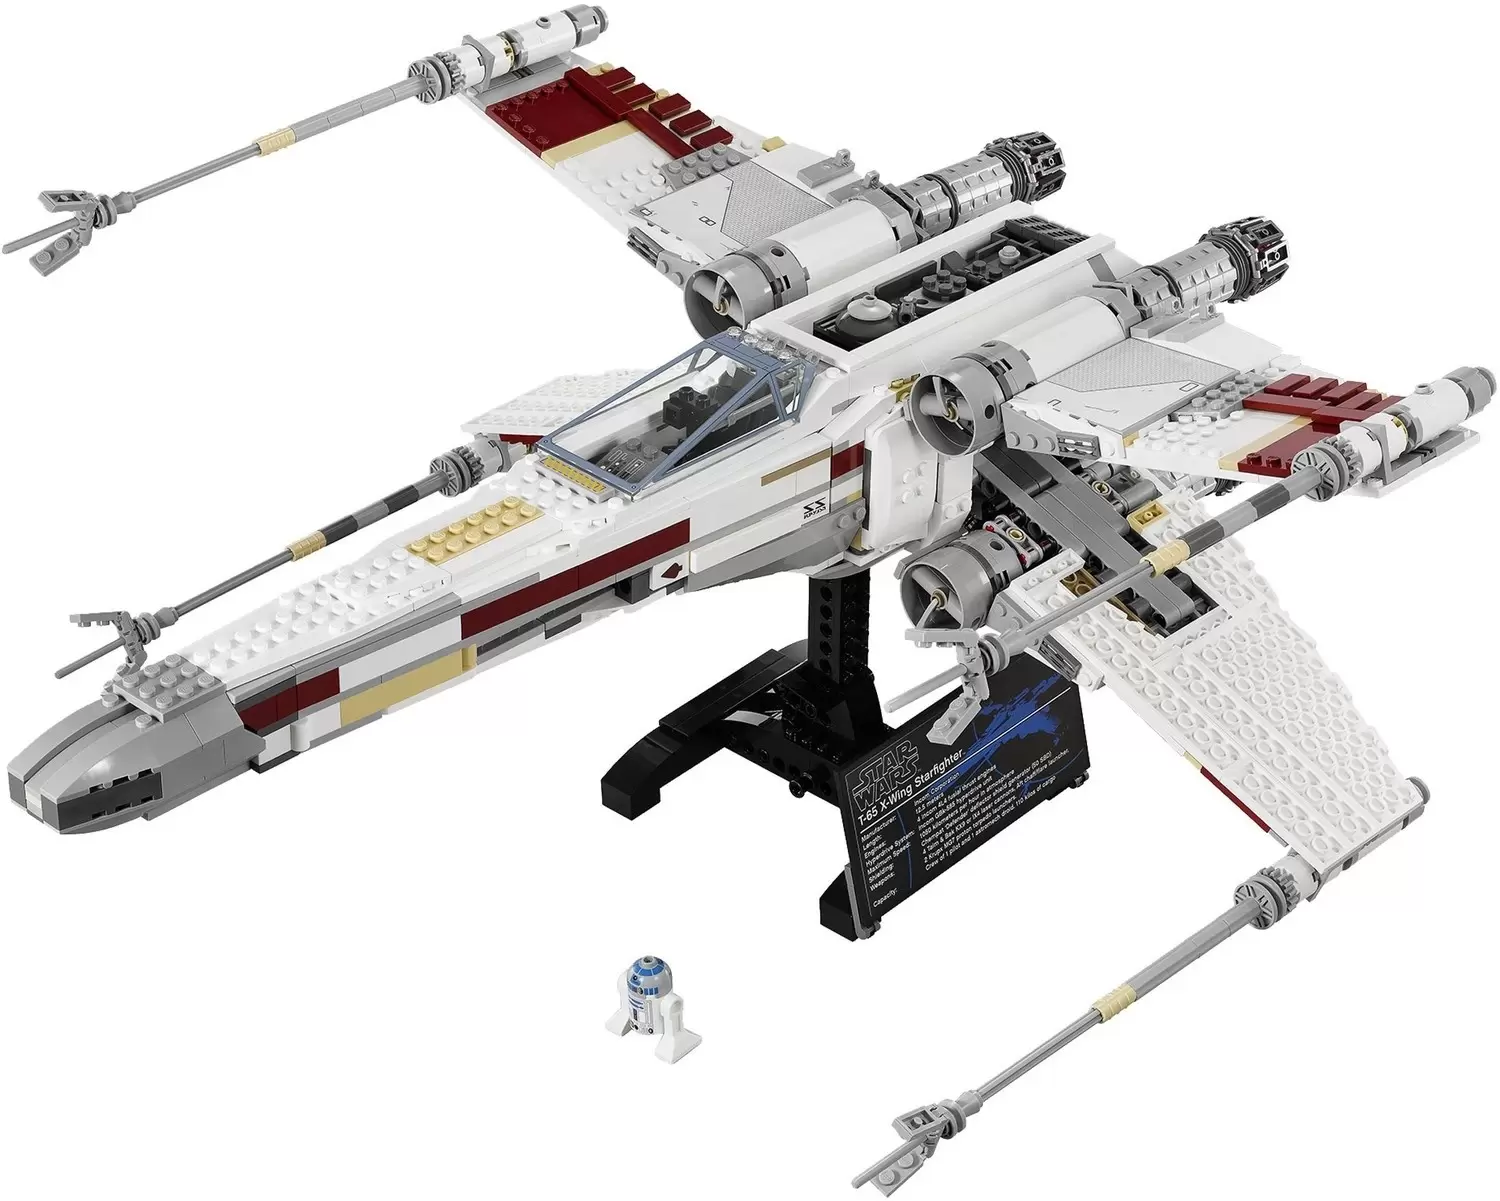 LEGO Star Wars - Red Five X-wing Starfighter